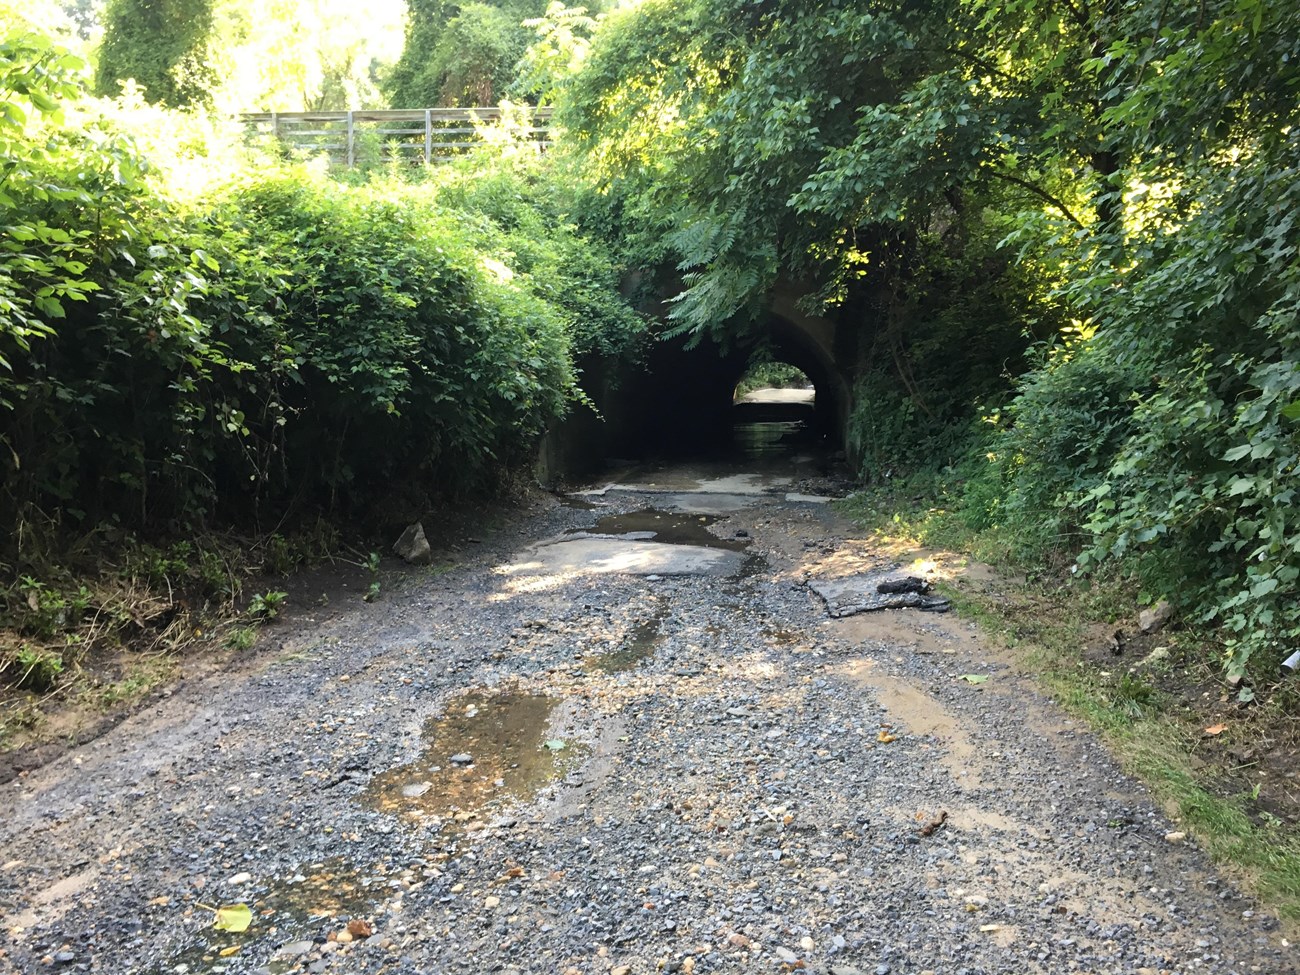 A gravel road with erosion on its surface runs through a tunnel